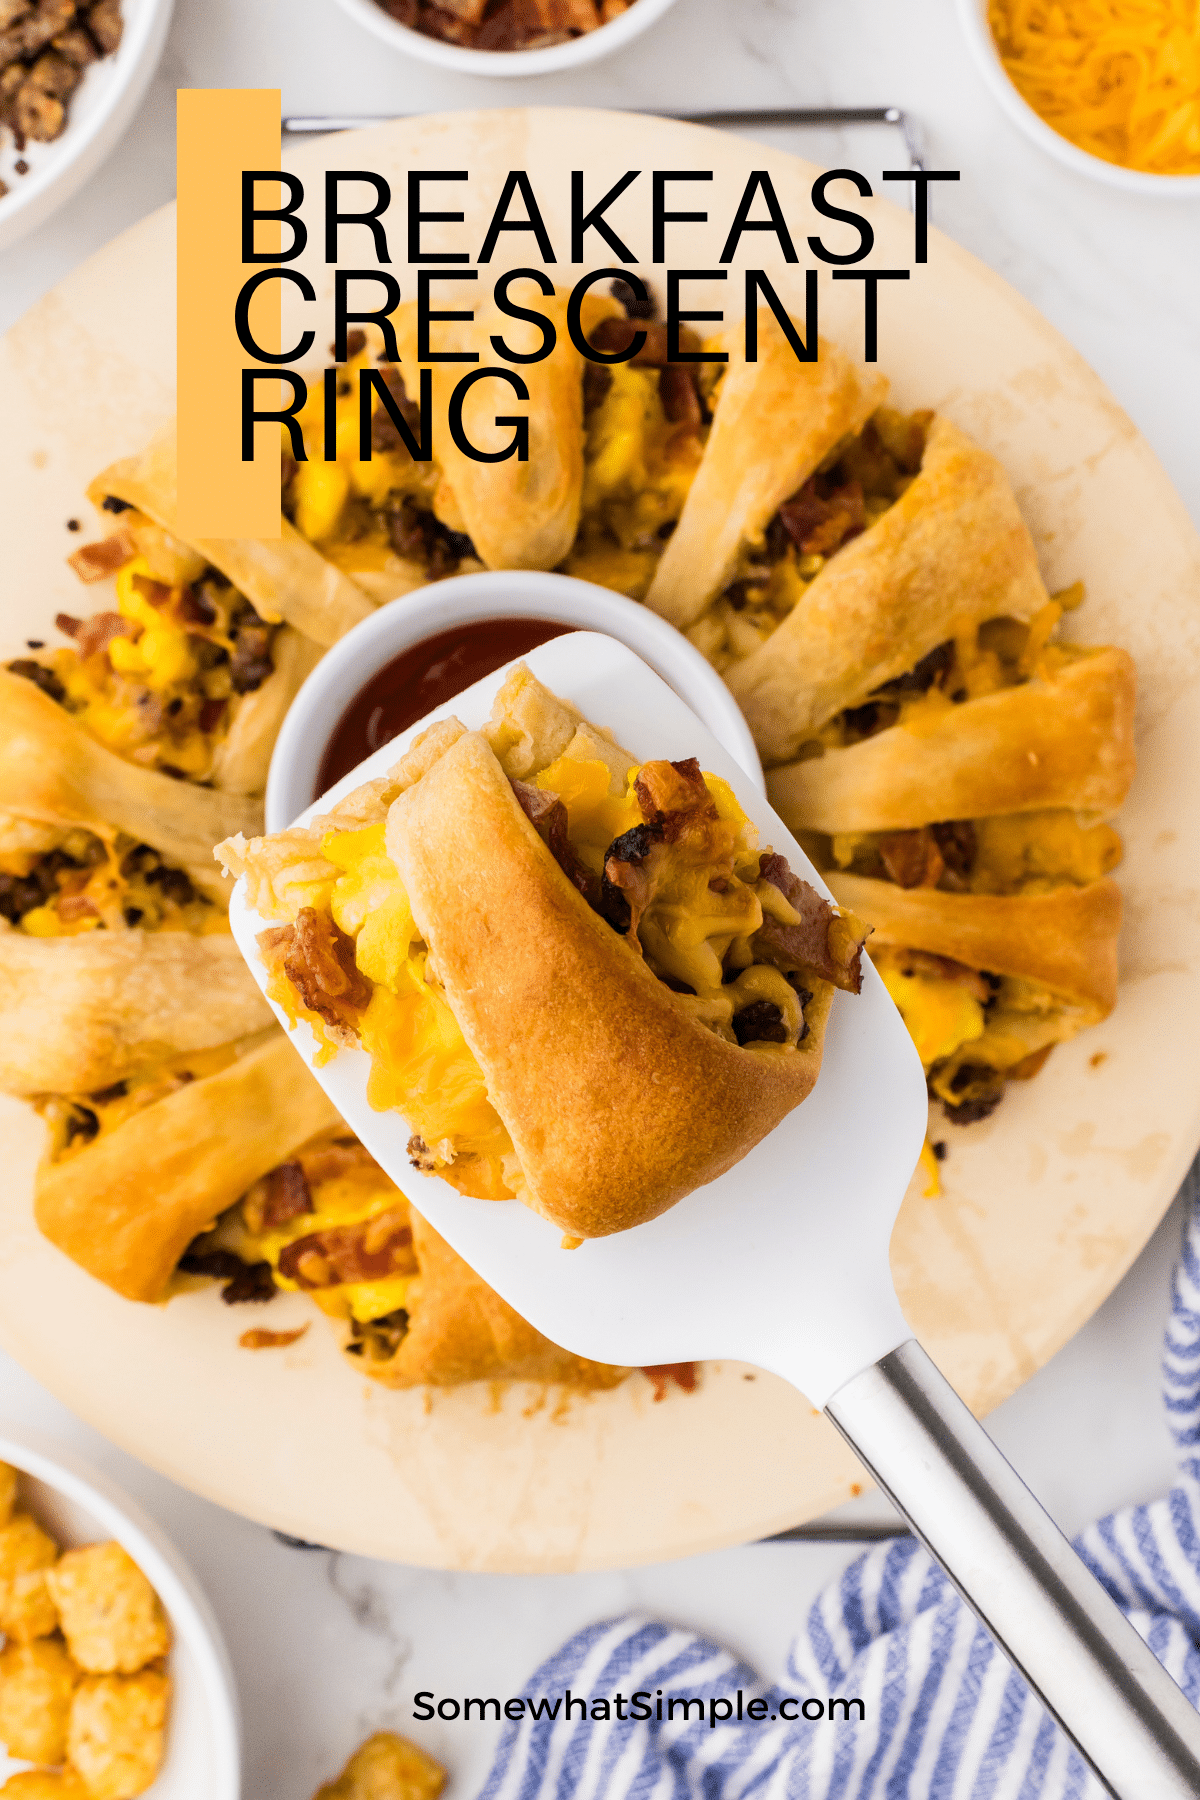 This breakfast crescent ring is a fun way to serve an impressive and hearty breakfast that includes everyone's favorite breakfast foods all in a single slice. A crescent dough ring filled with eggs, sausage, bacon, cheese, and tater tots is baked until warm, gooey, and golden! via @somewhatsimple